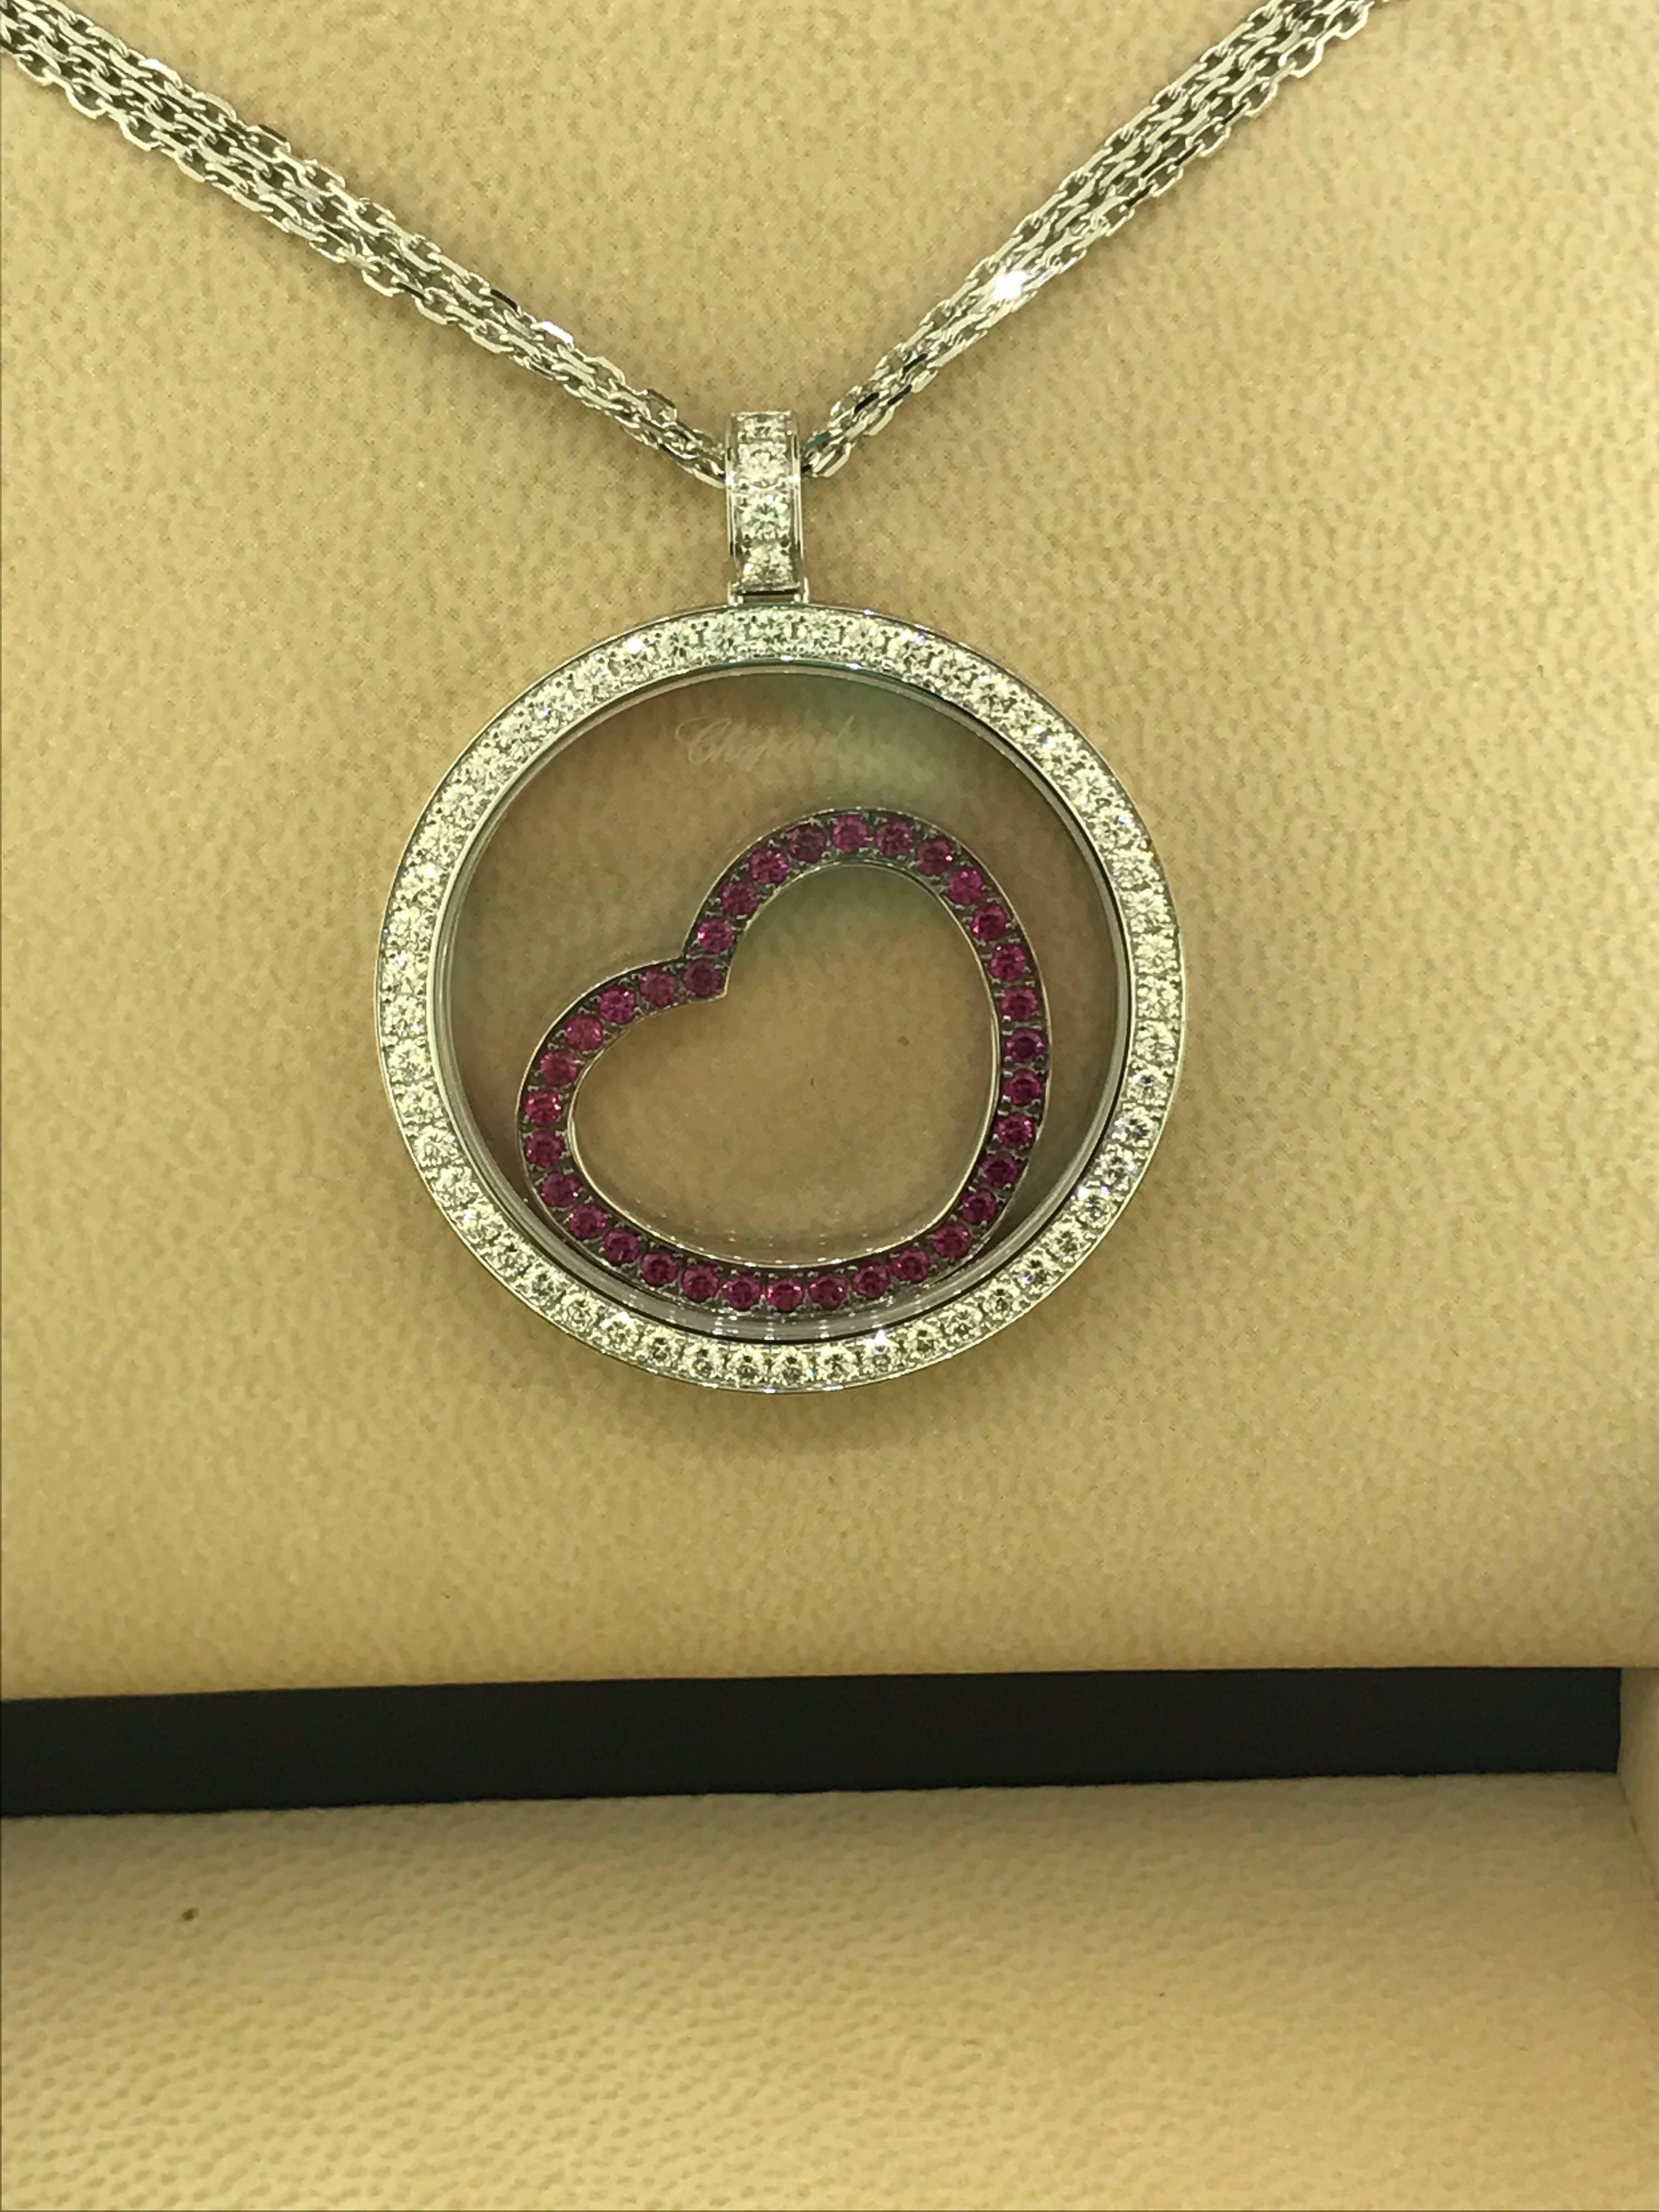 Women's or Men's Chopard Happy Diamonds White Gold Diamond and Rubies Heart Pendant Necklace New